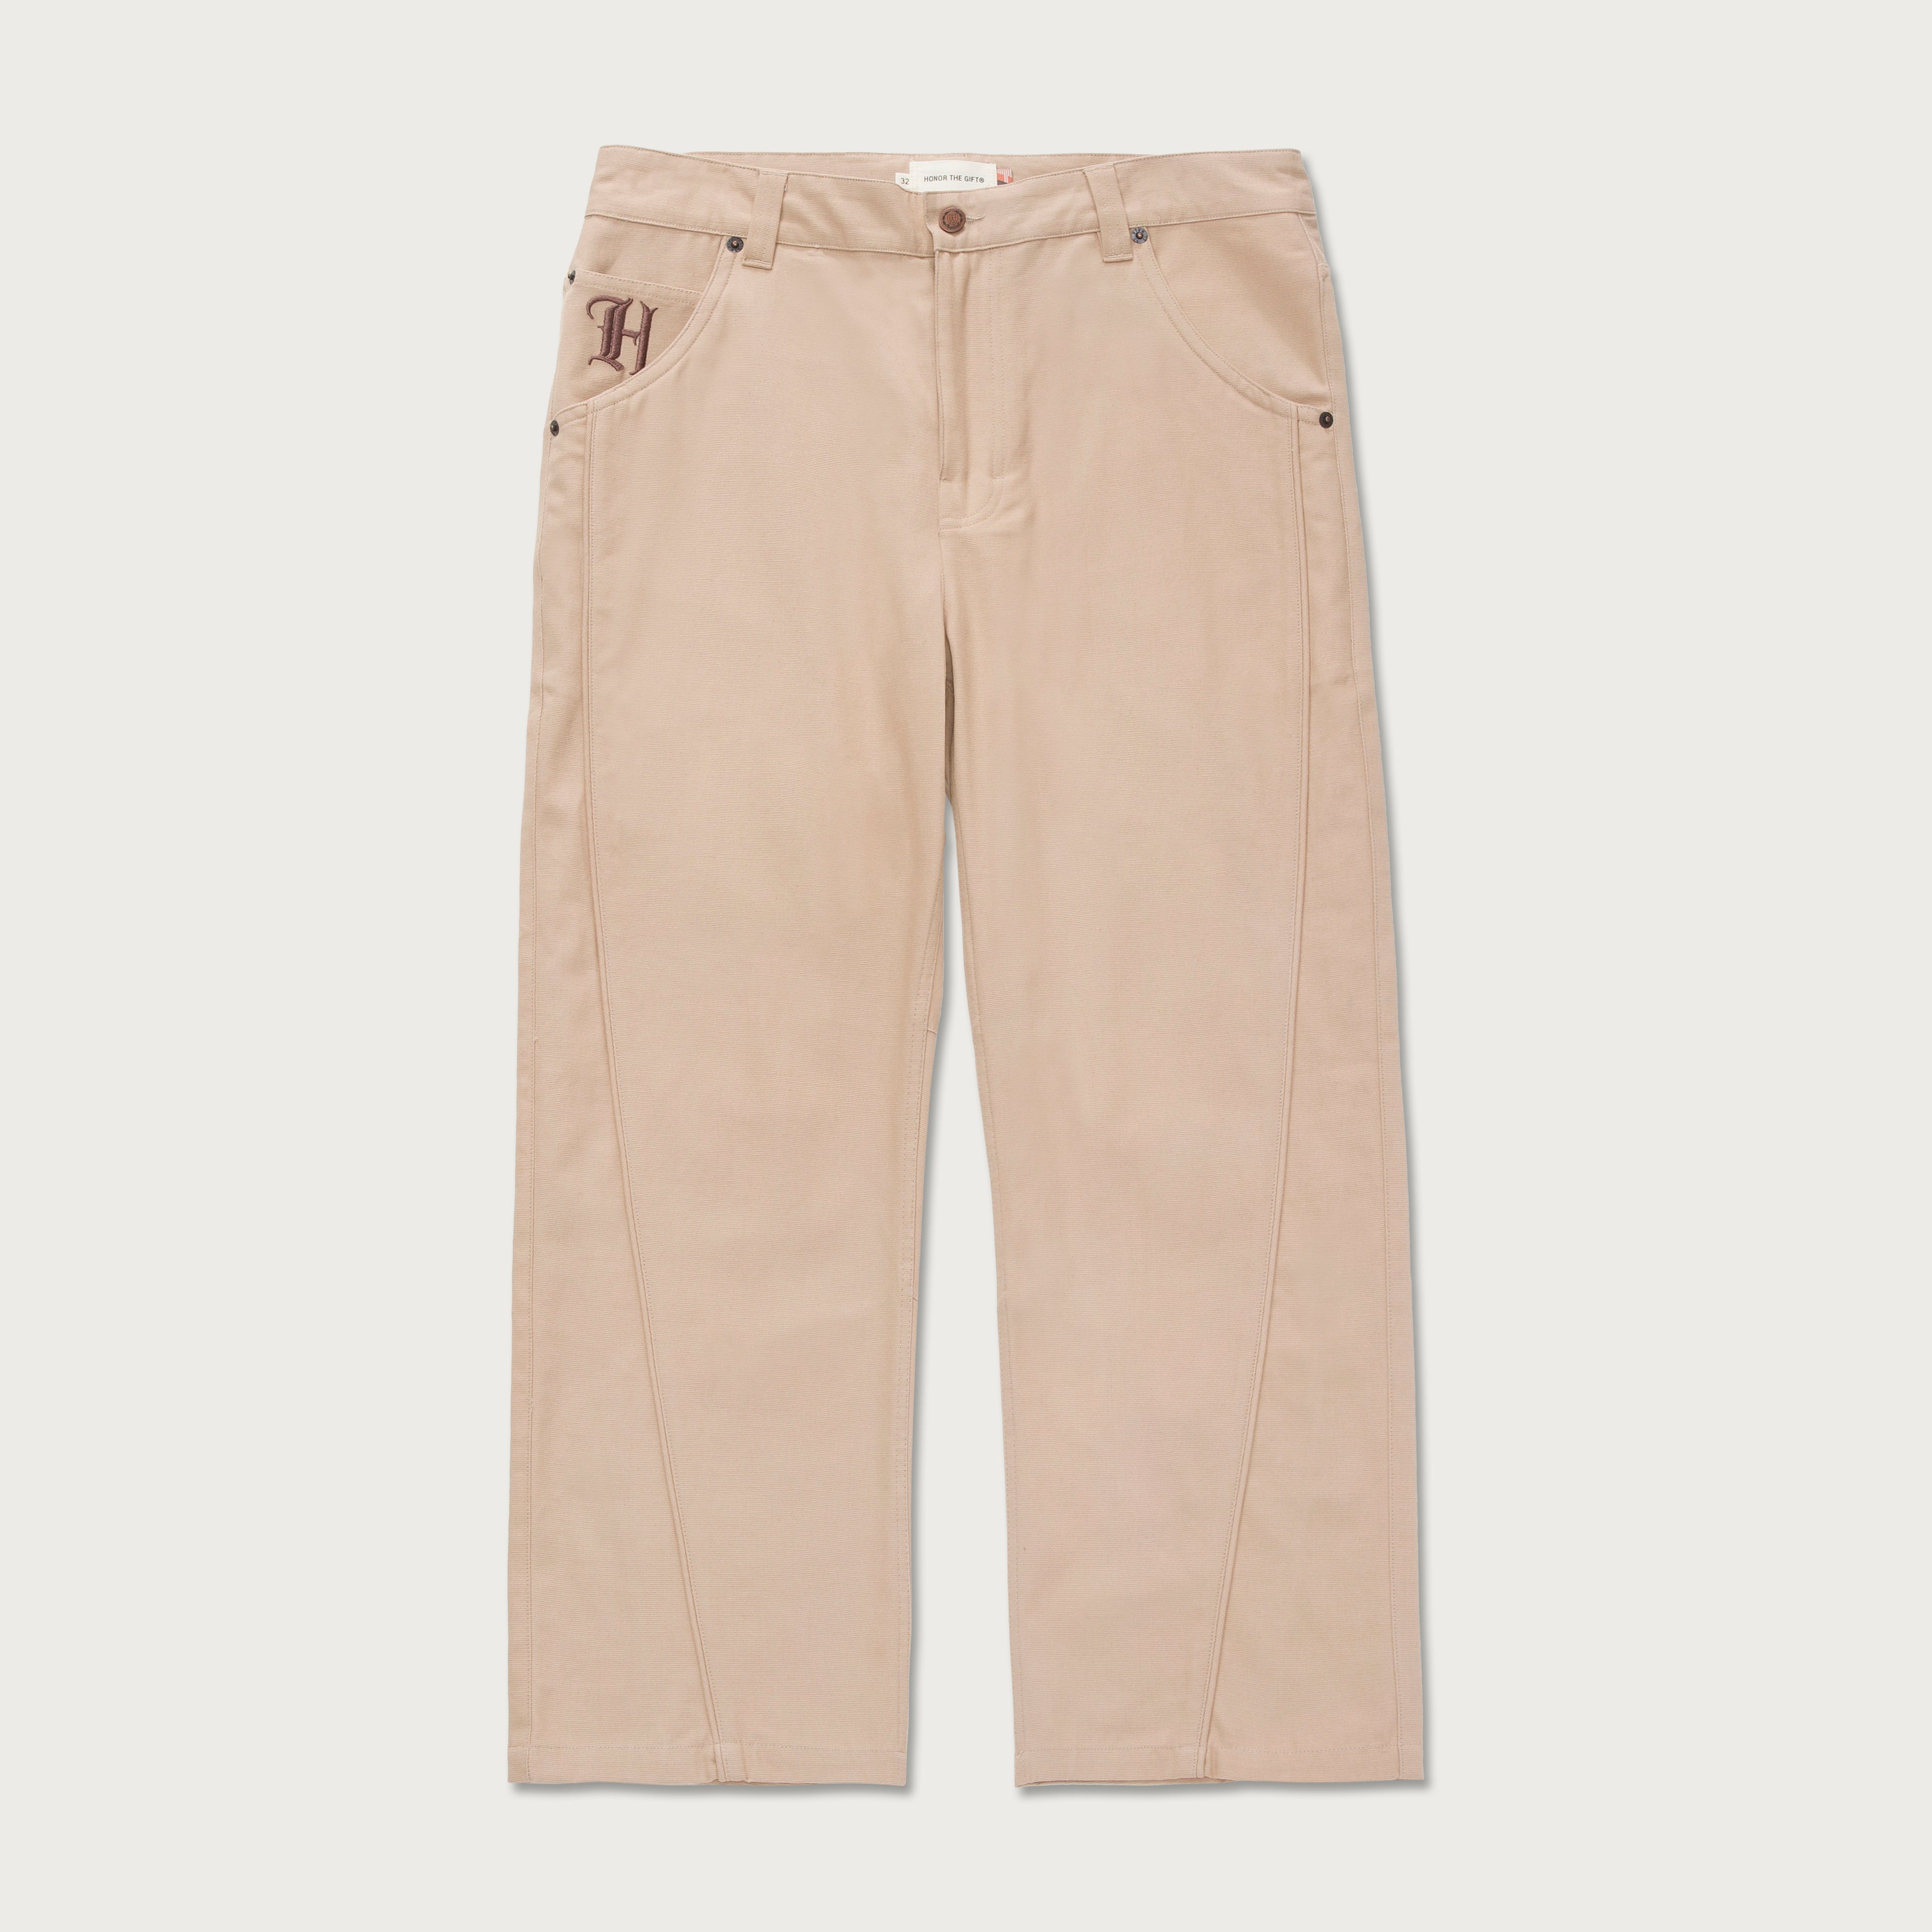 Pact Pants gift − Sale: up to −30%